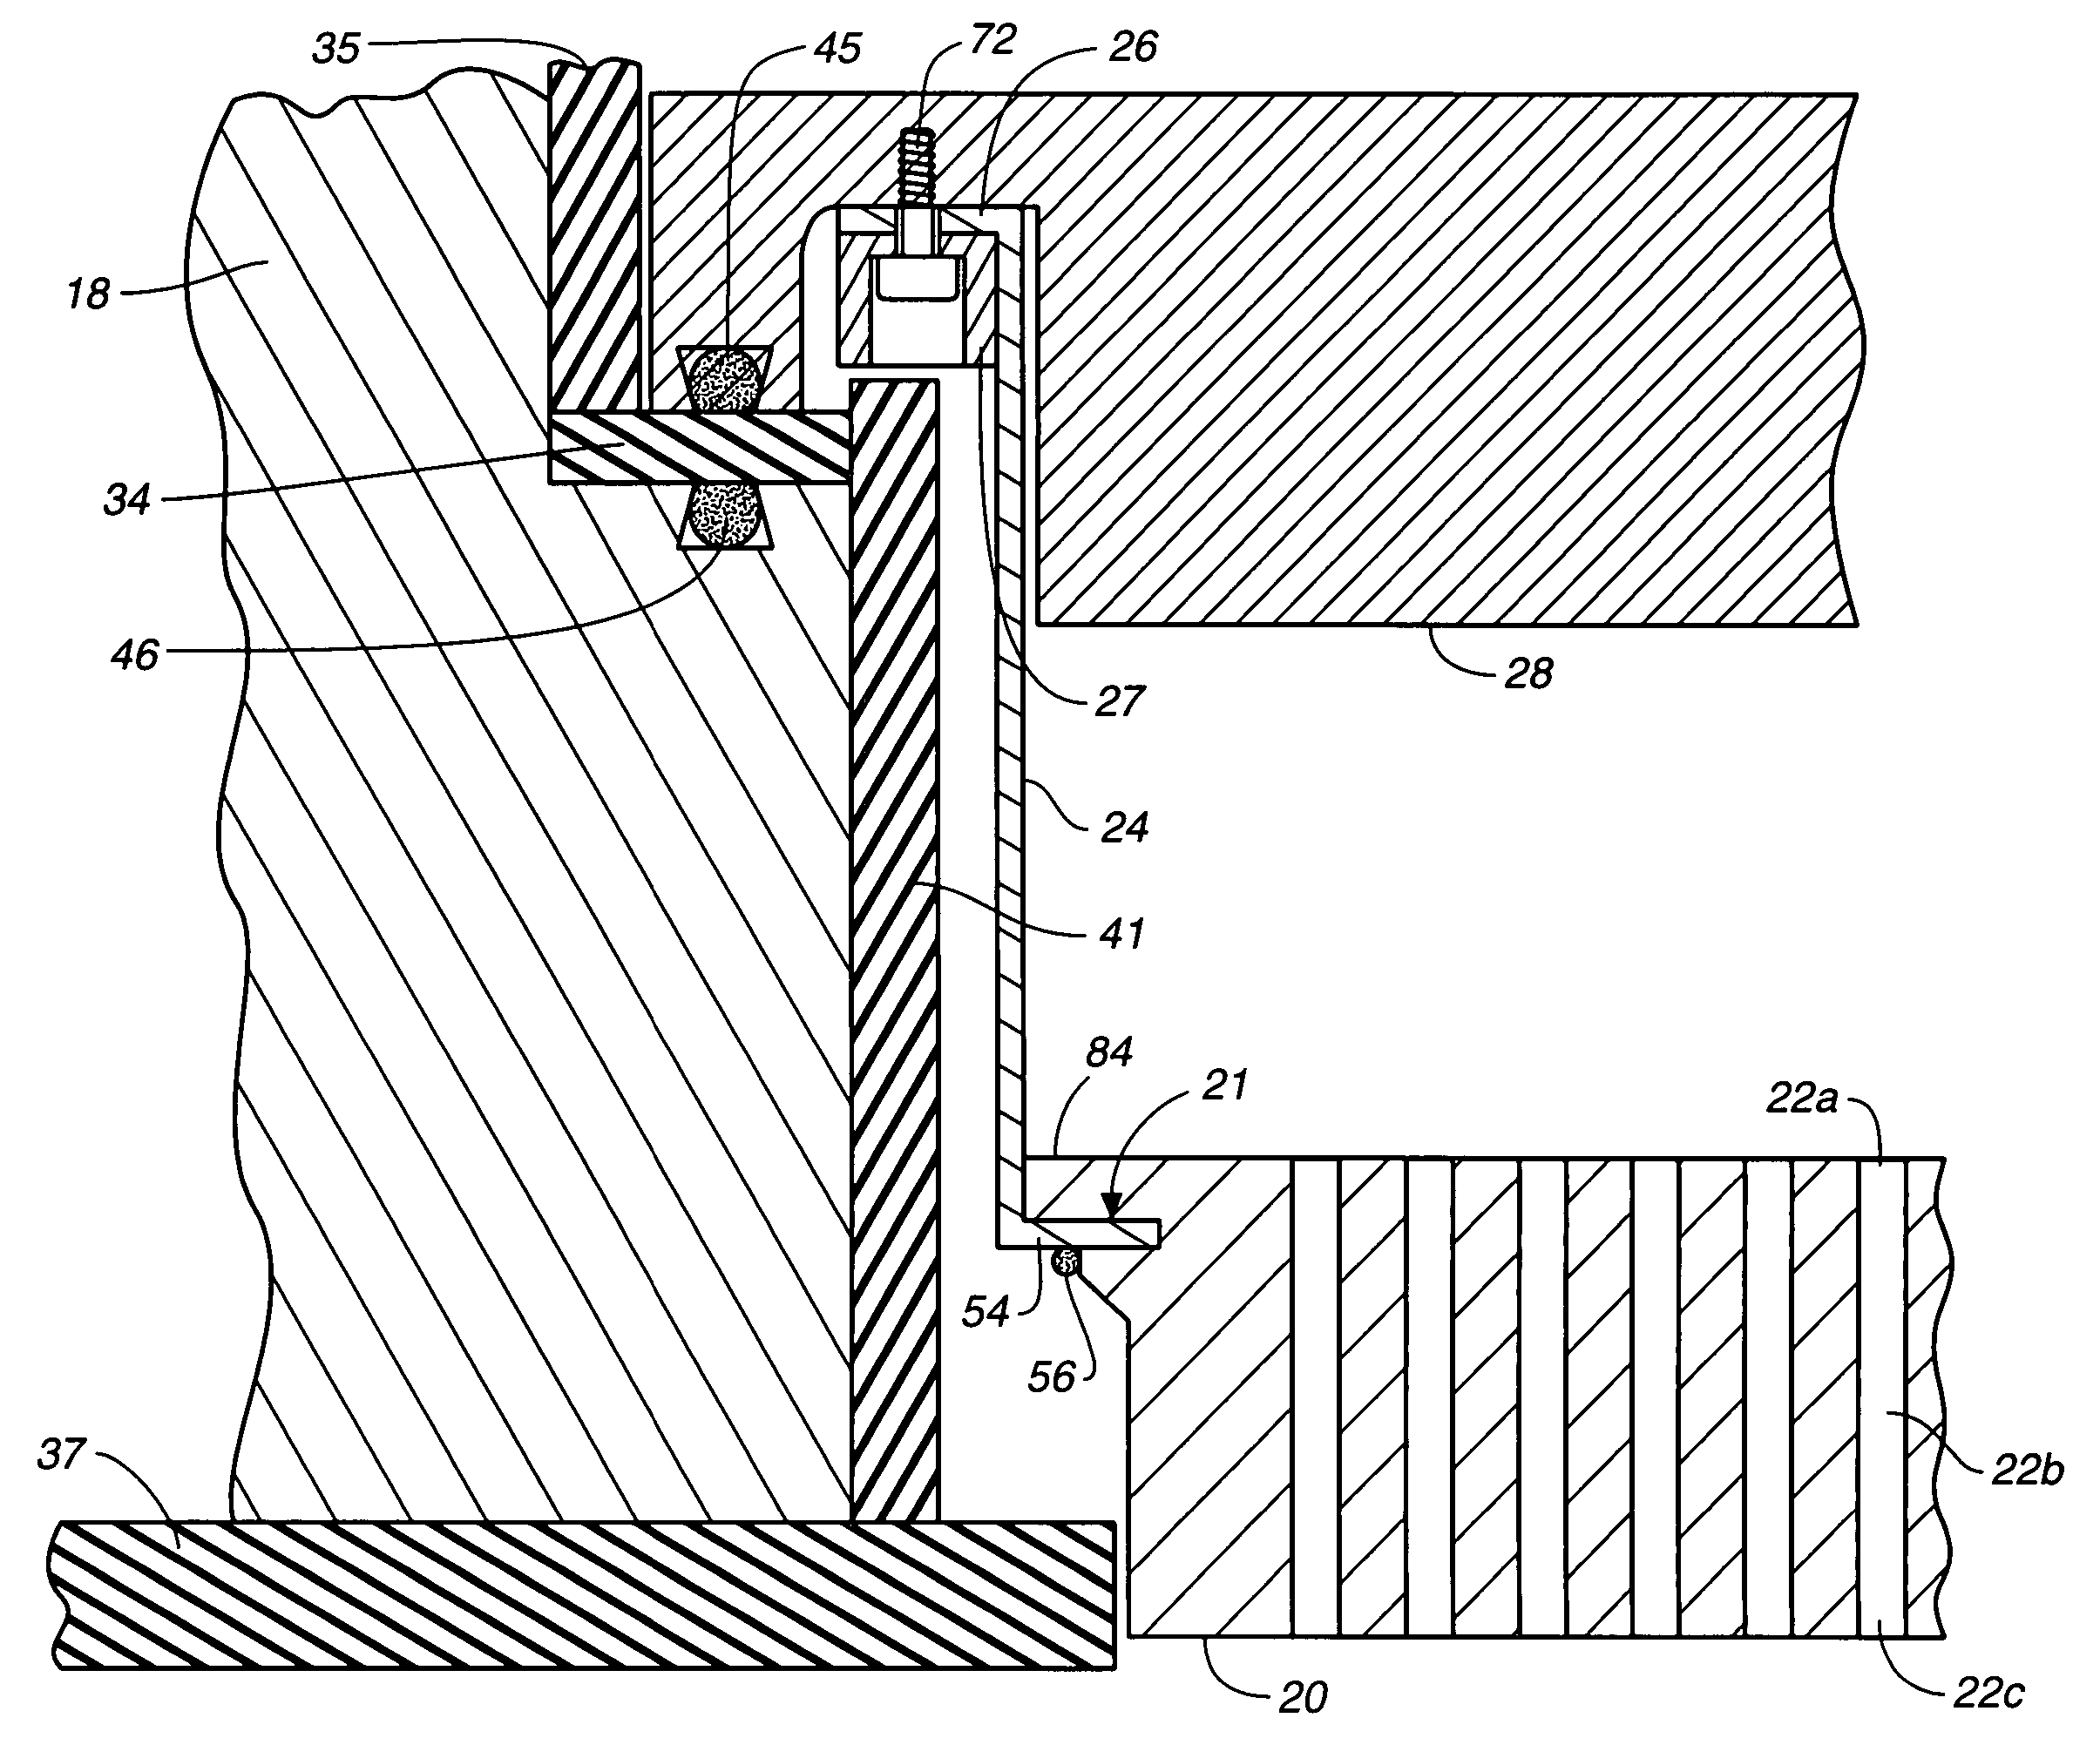 Suspended gas distribution manifold for plasma chamber